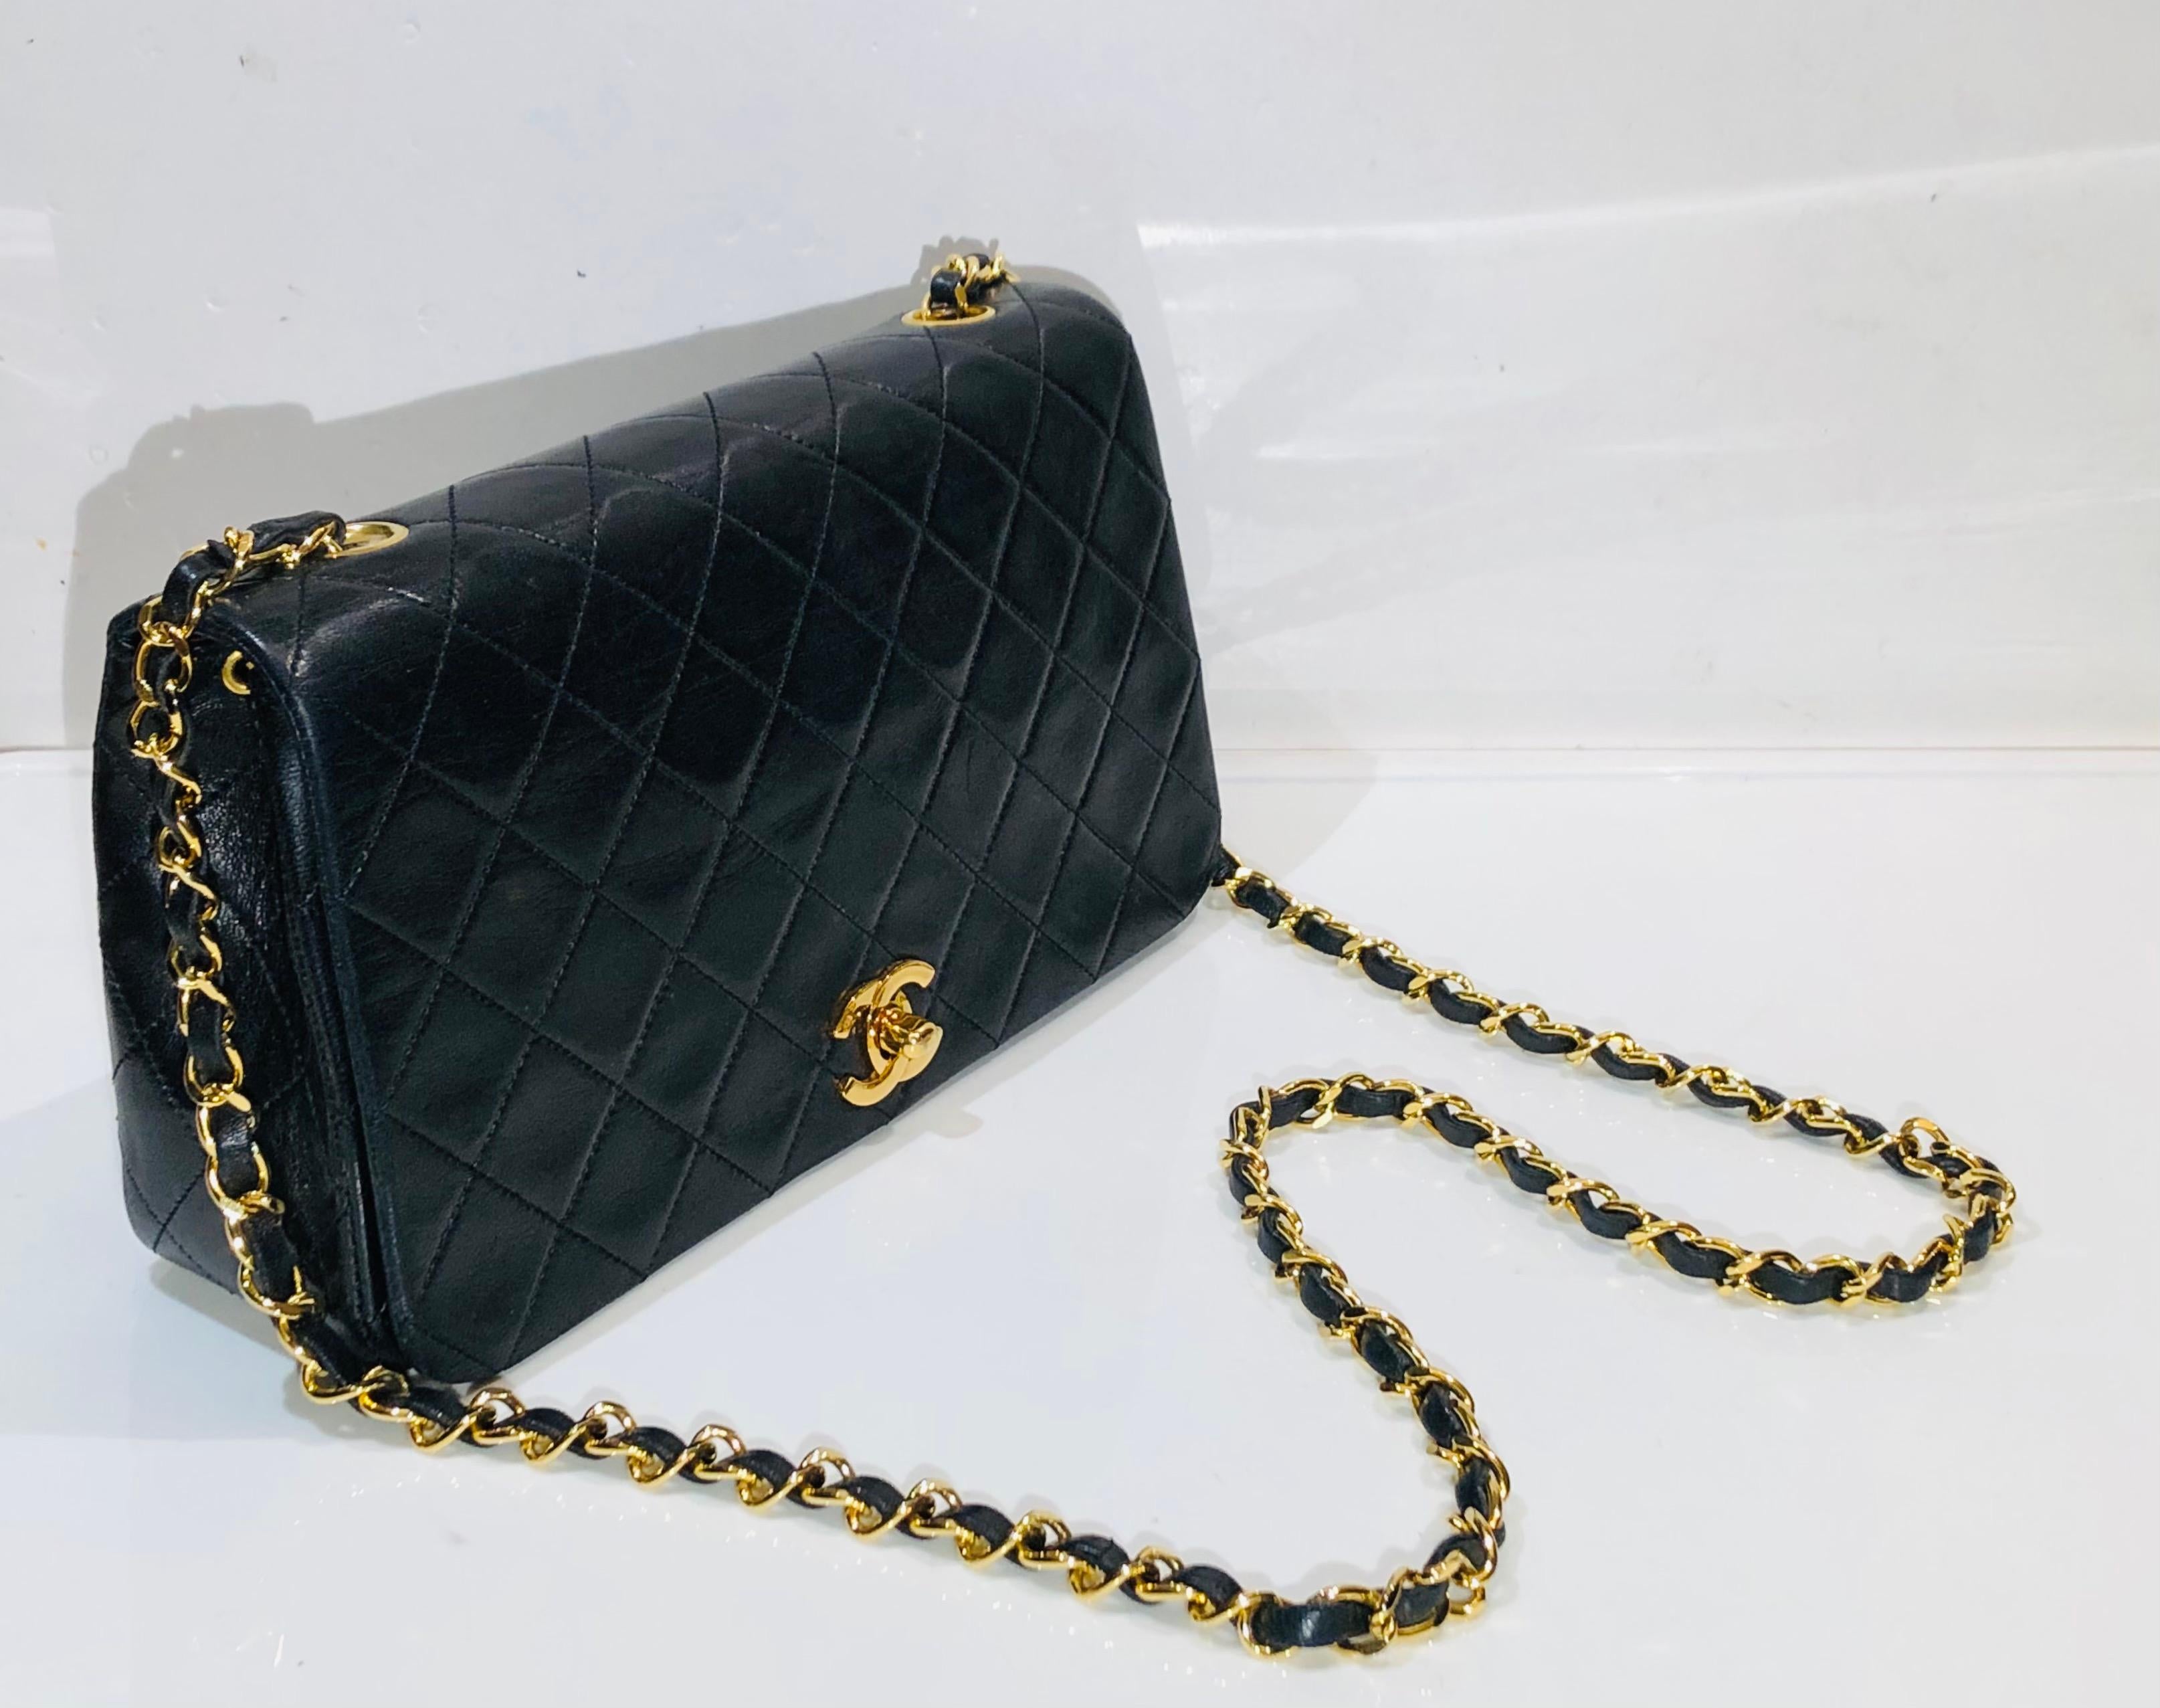 - Vintage 1989- 1991 Chanel  23cm black quilted lambskin full flap shoulder bag. 

- Gold plated hardware in “CC‘ turnlock closure. 

- Red leather interior with five classic compartments. 

- Length: 23cm. Height: 13cm. Width: 6.5cm. Shoulder Drop: